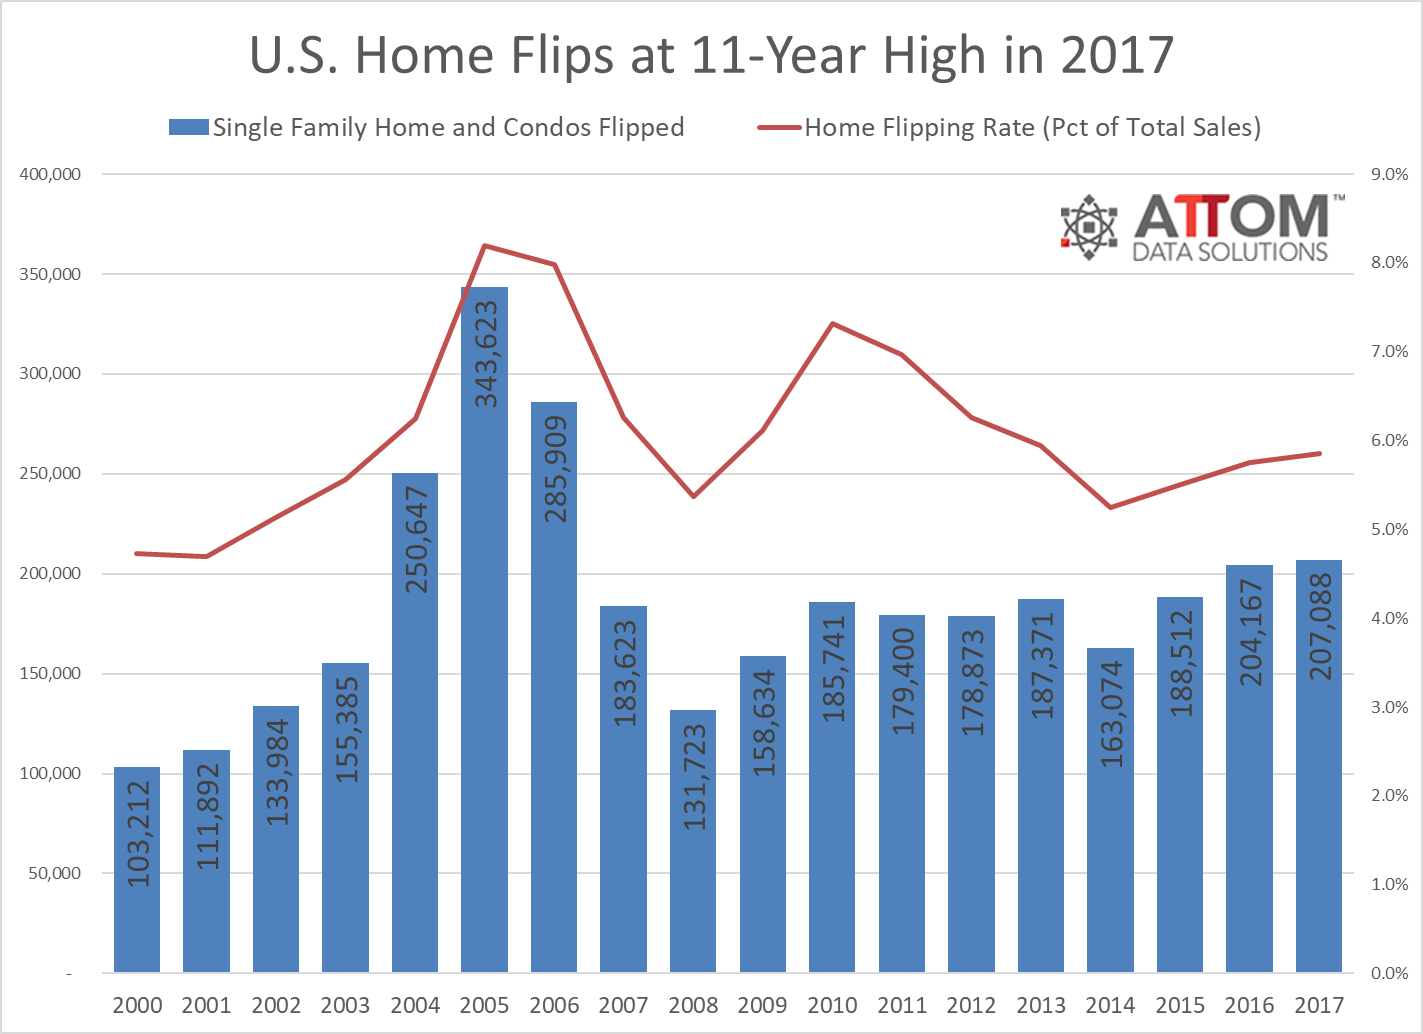 A total of 207,088 single-family homes and condos were flipped in 2017, up one percent from the 204,167 home flips in 2016 